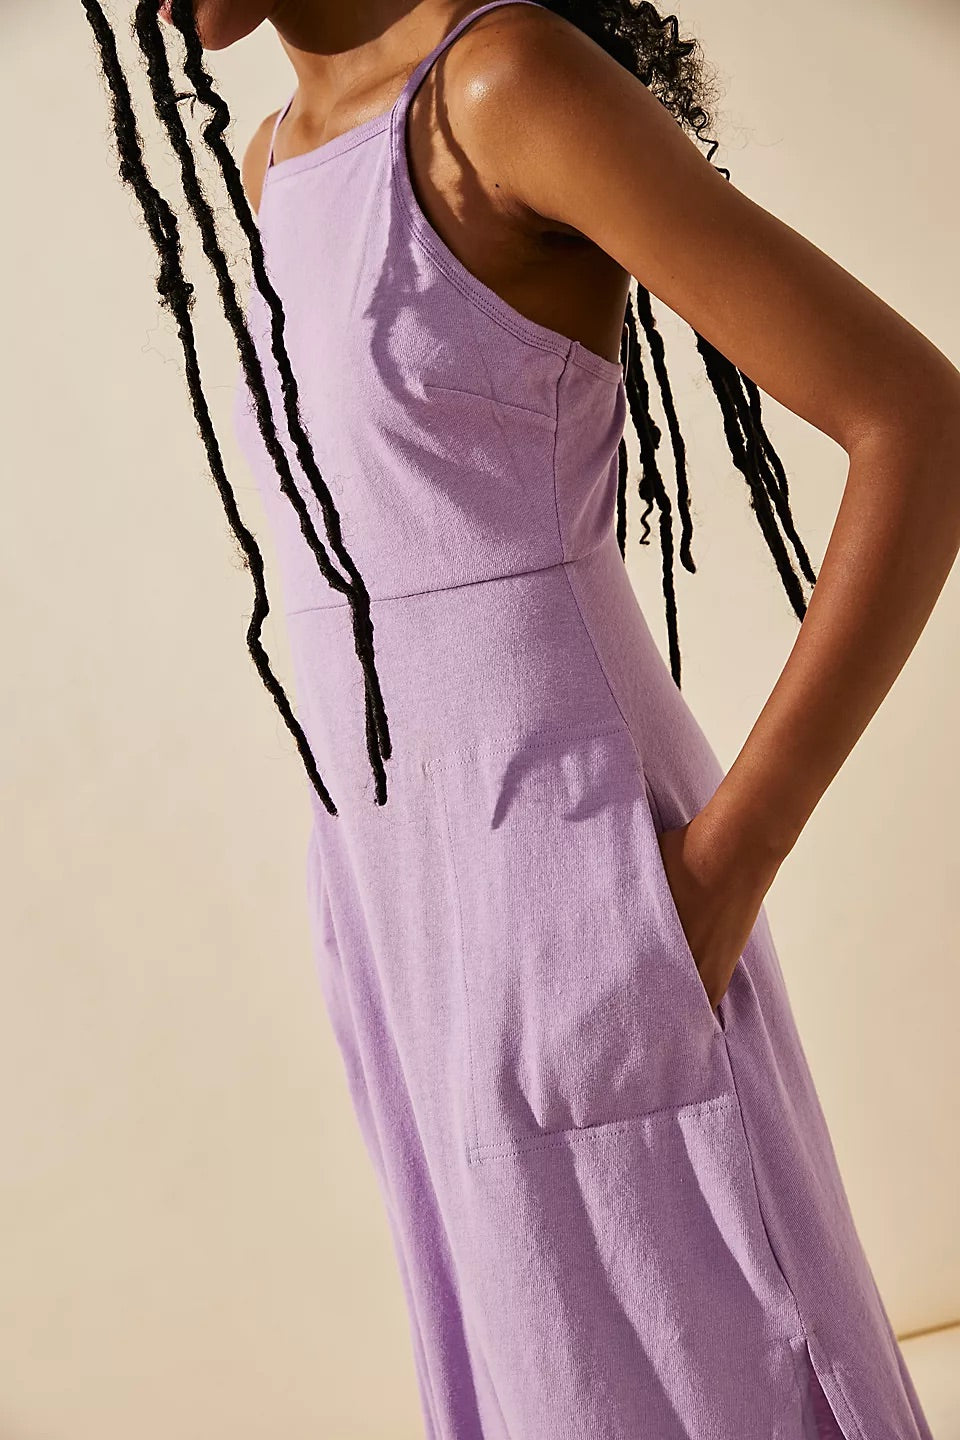 Free People Beach Essential Day Dress